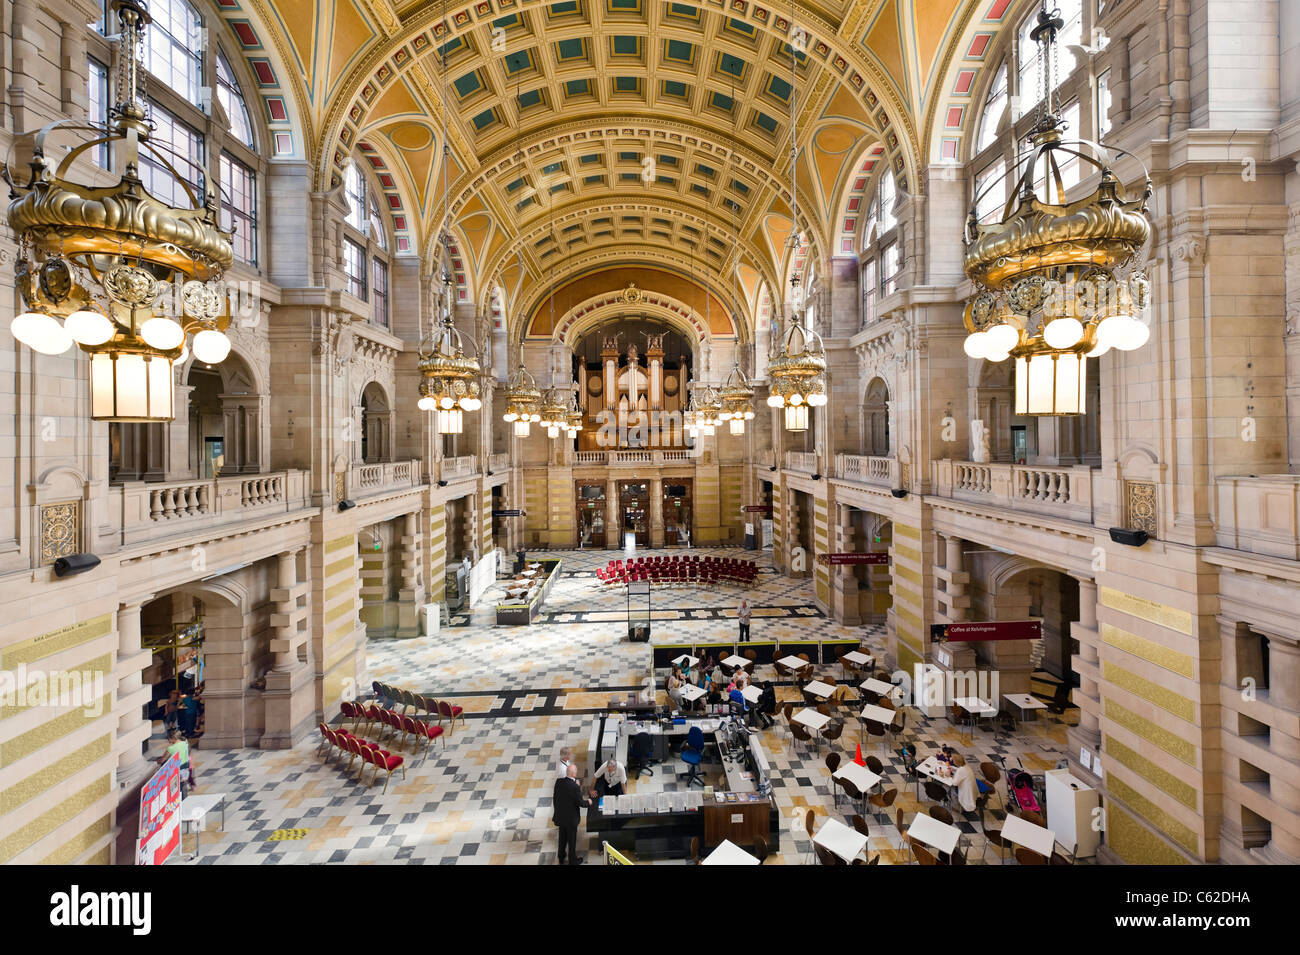 Centre Hall of the Kelvingrove Art Gallery and Museum with the Cafe in the foreground, West End, Glasgow, Scotland, UK Stock Photo